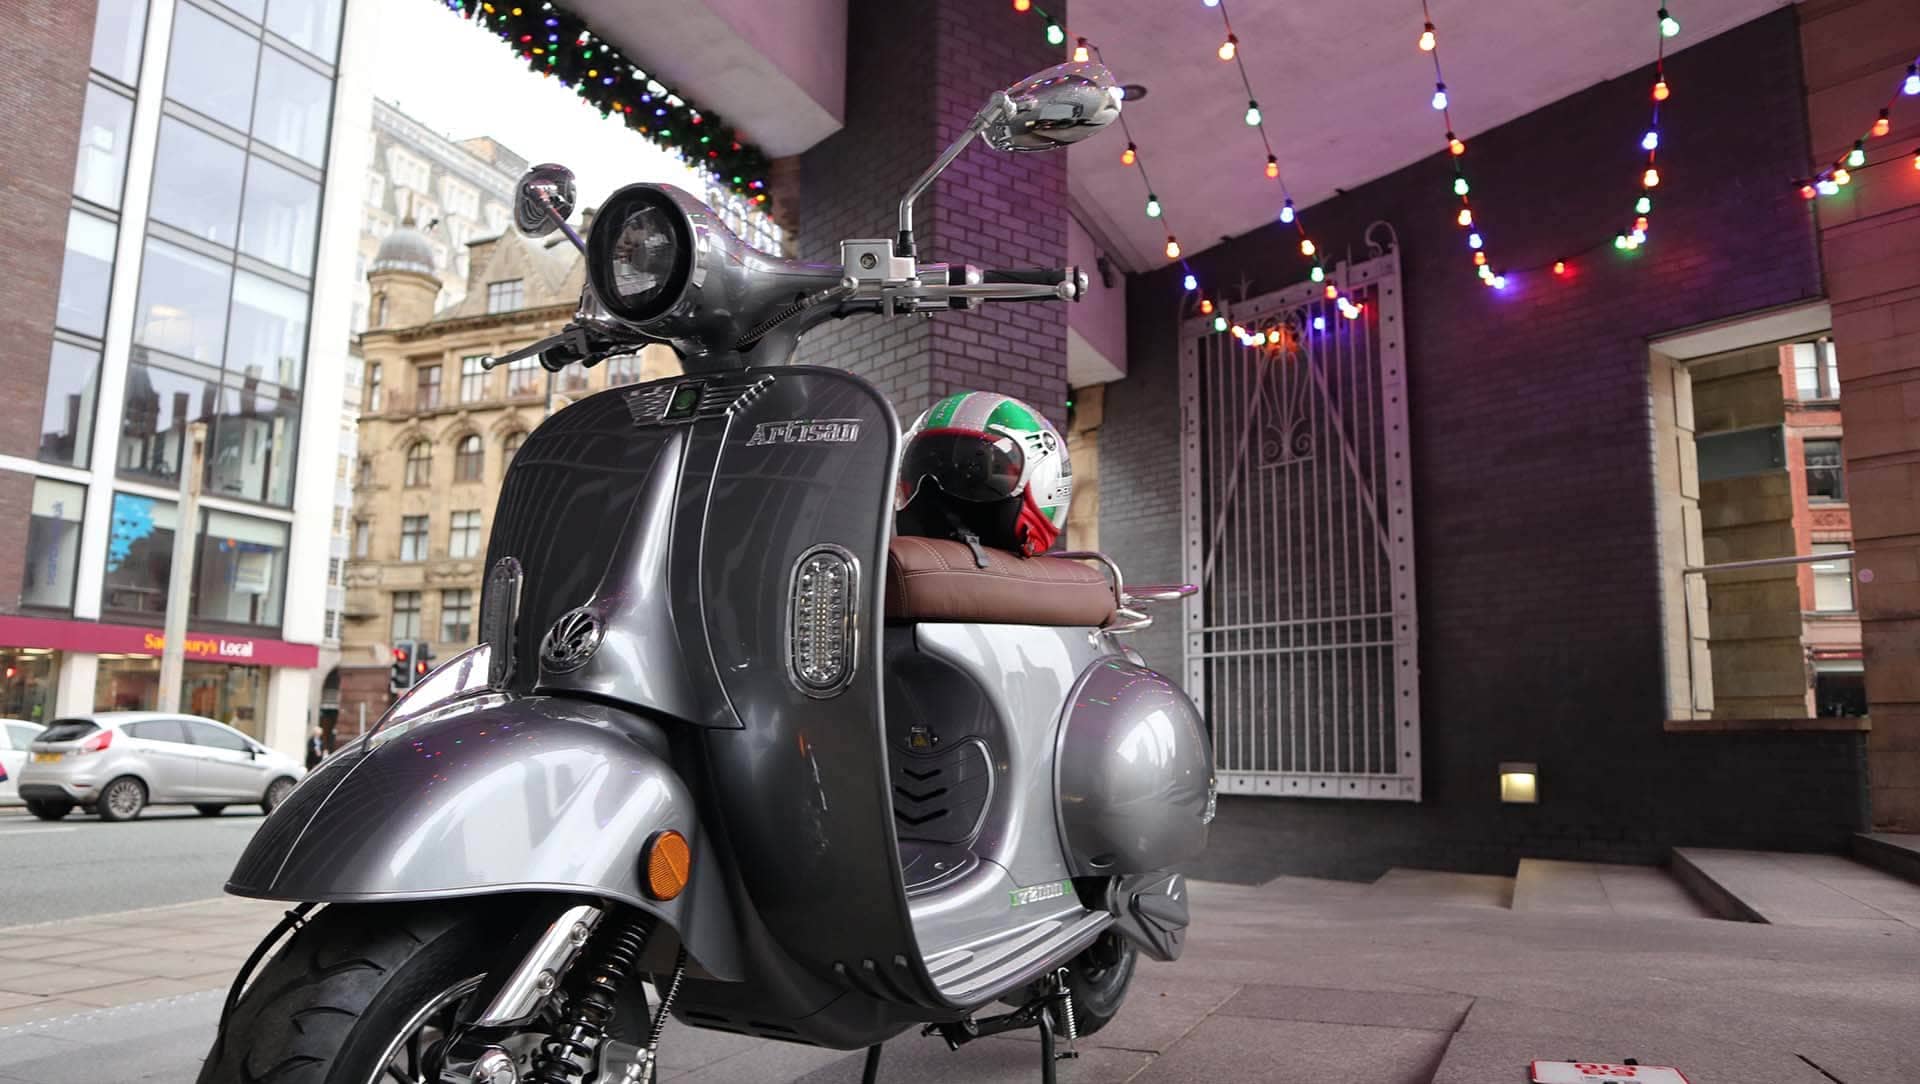 Grey Artisan scooter with helmet on the seat in a city with Christmas lights